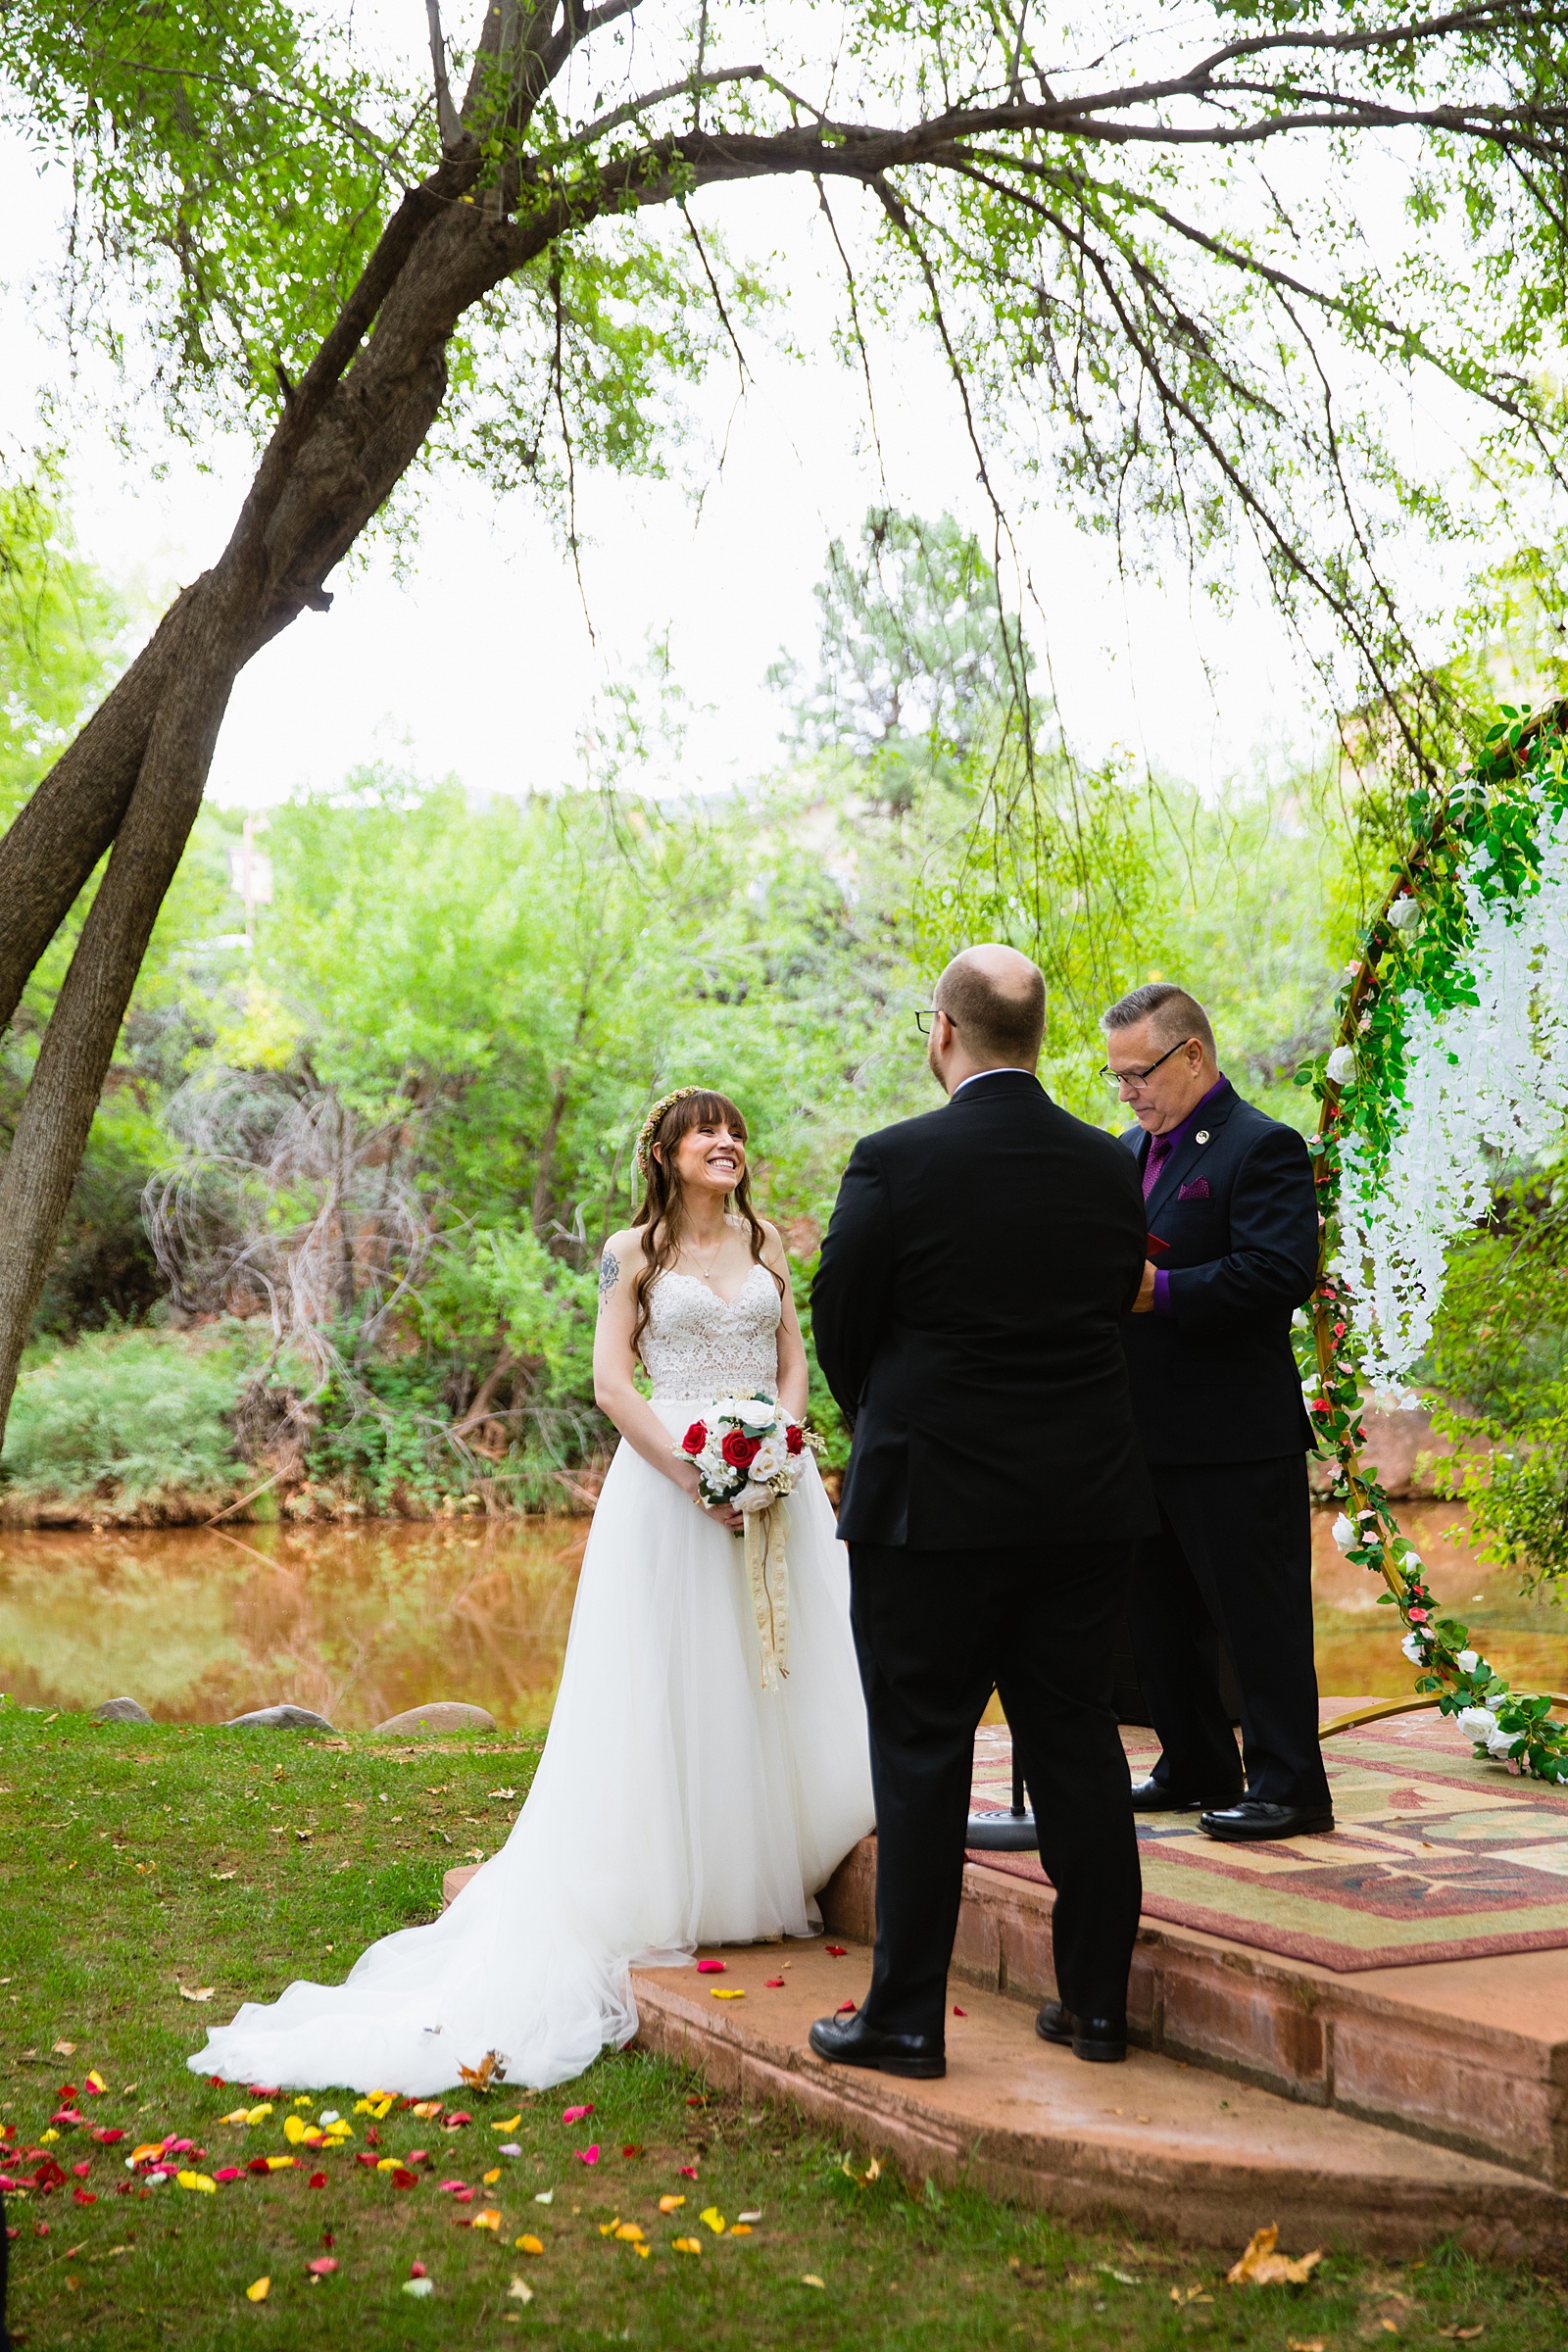 Bride looking at her groom during their wedding ceremony at Los Abrigados by Sedona wedding photographer PMA Photography.